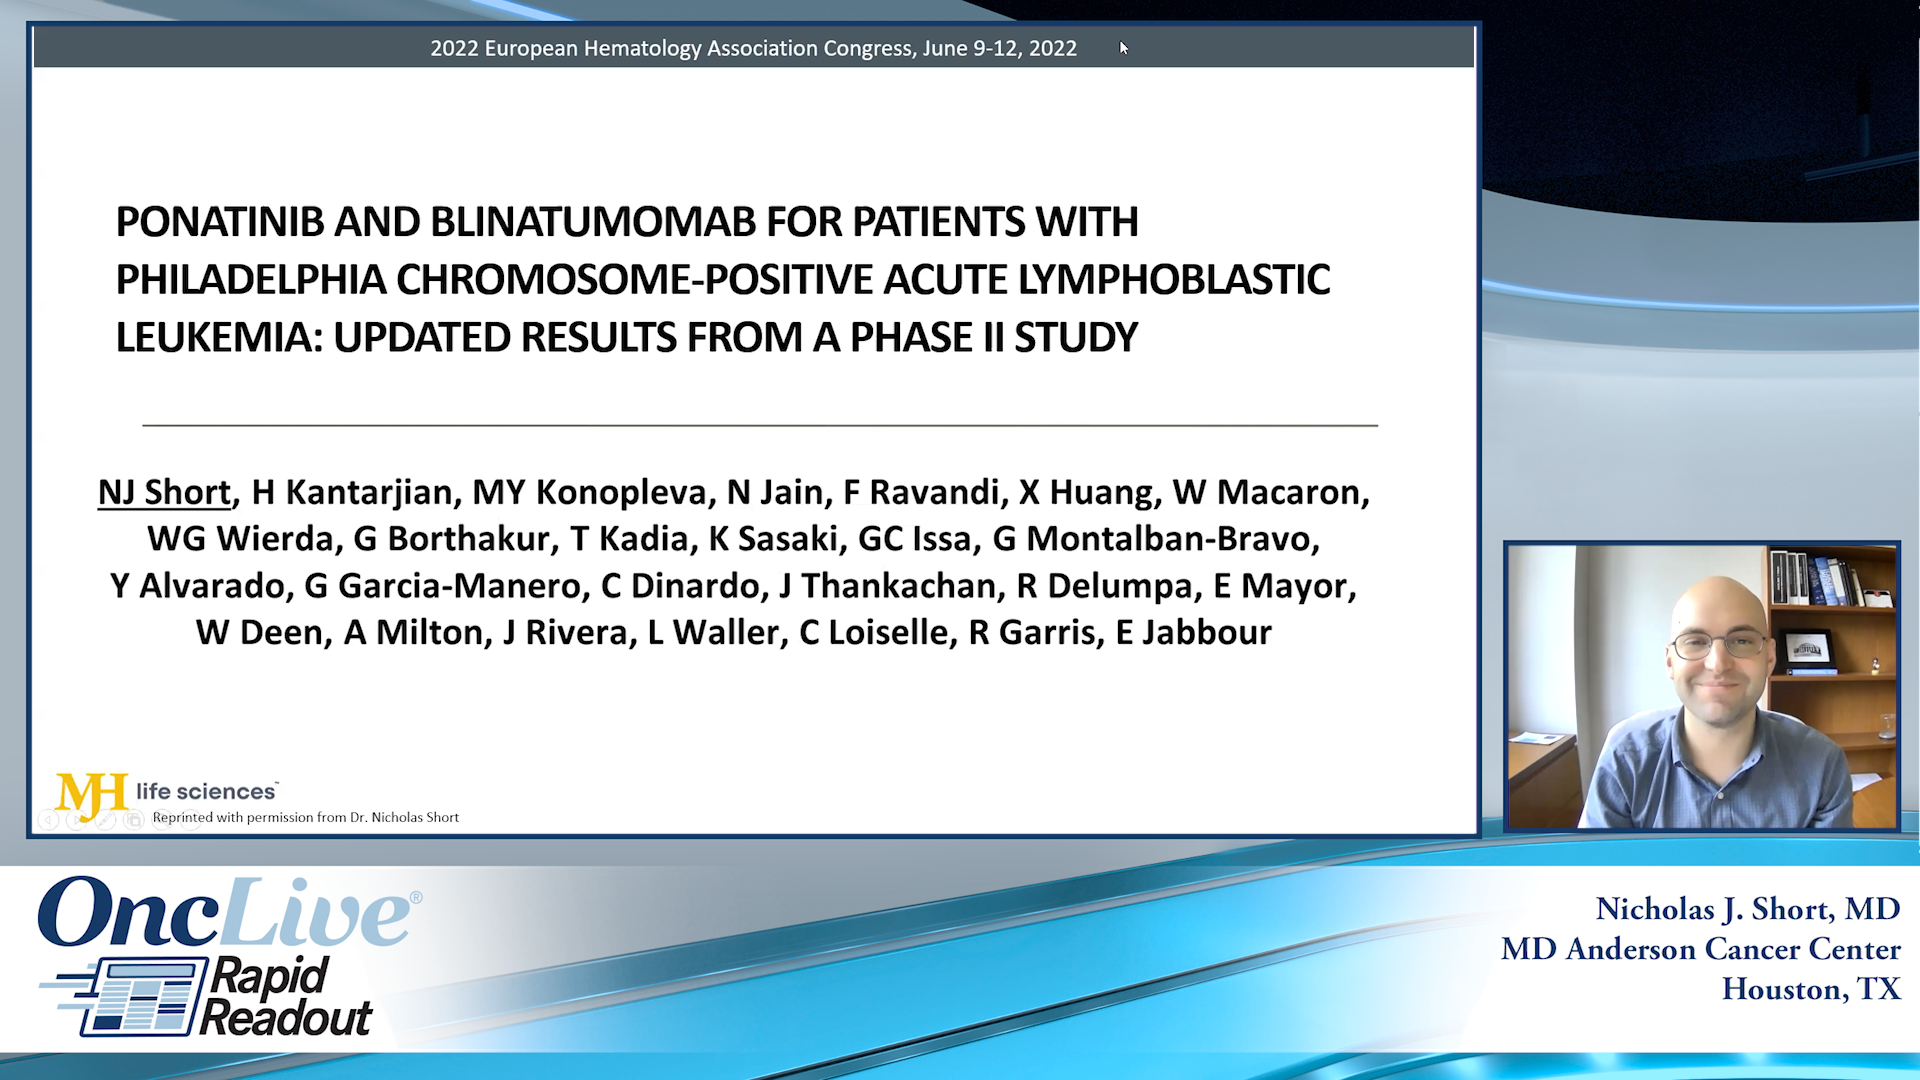 Ponatinib and Blinatumomab for Patients with Philadelphia Chromosome-Positive Acute Lymphoblastic Leukemia: Updated Results from a Phase II Study